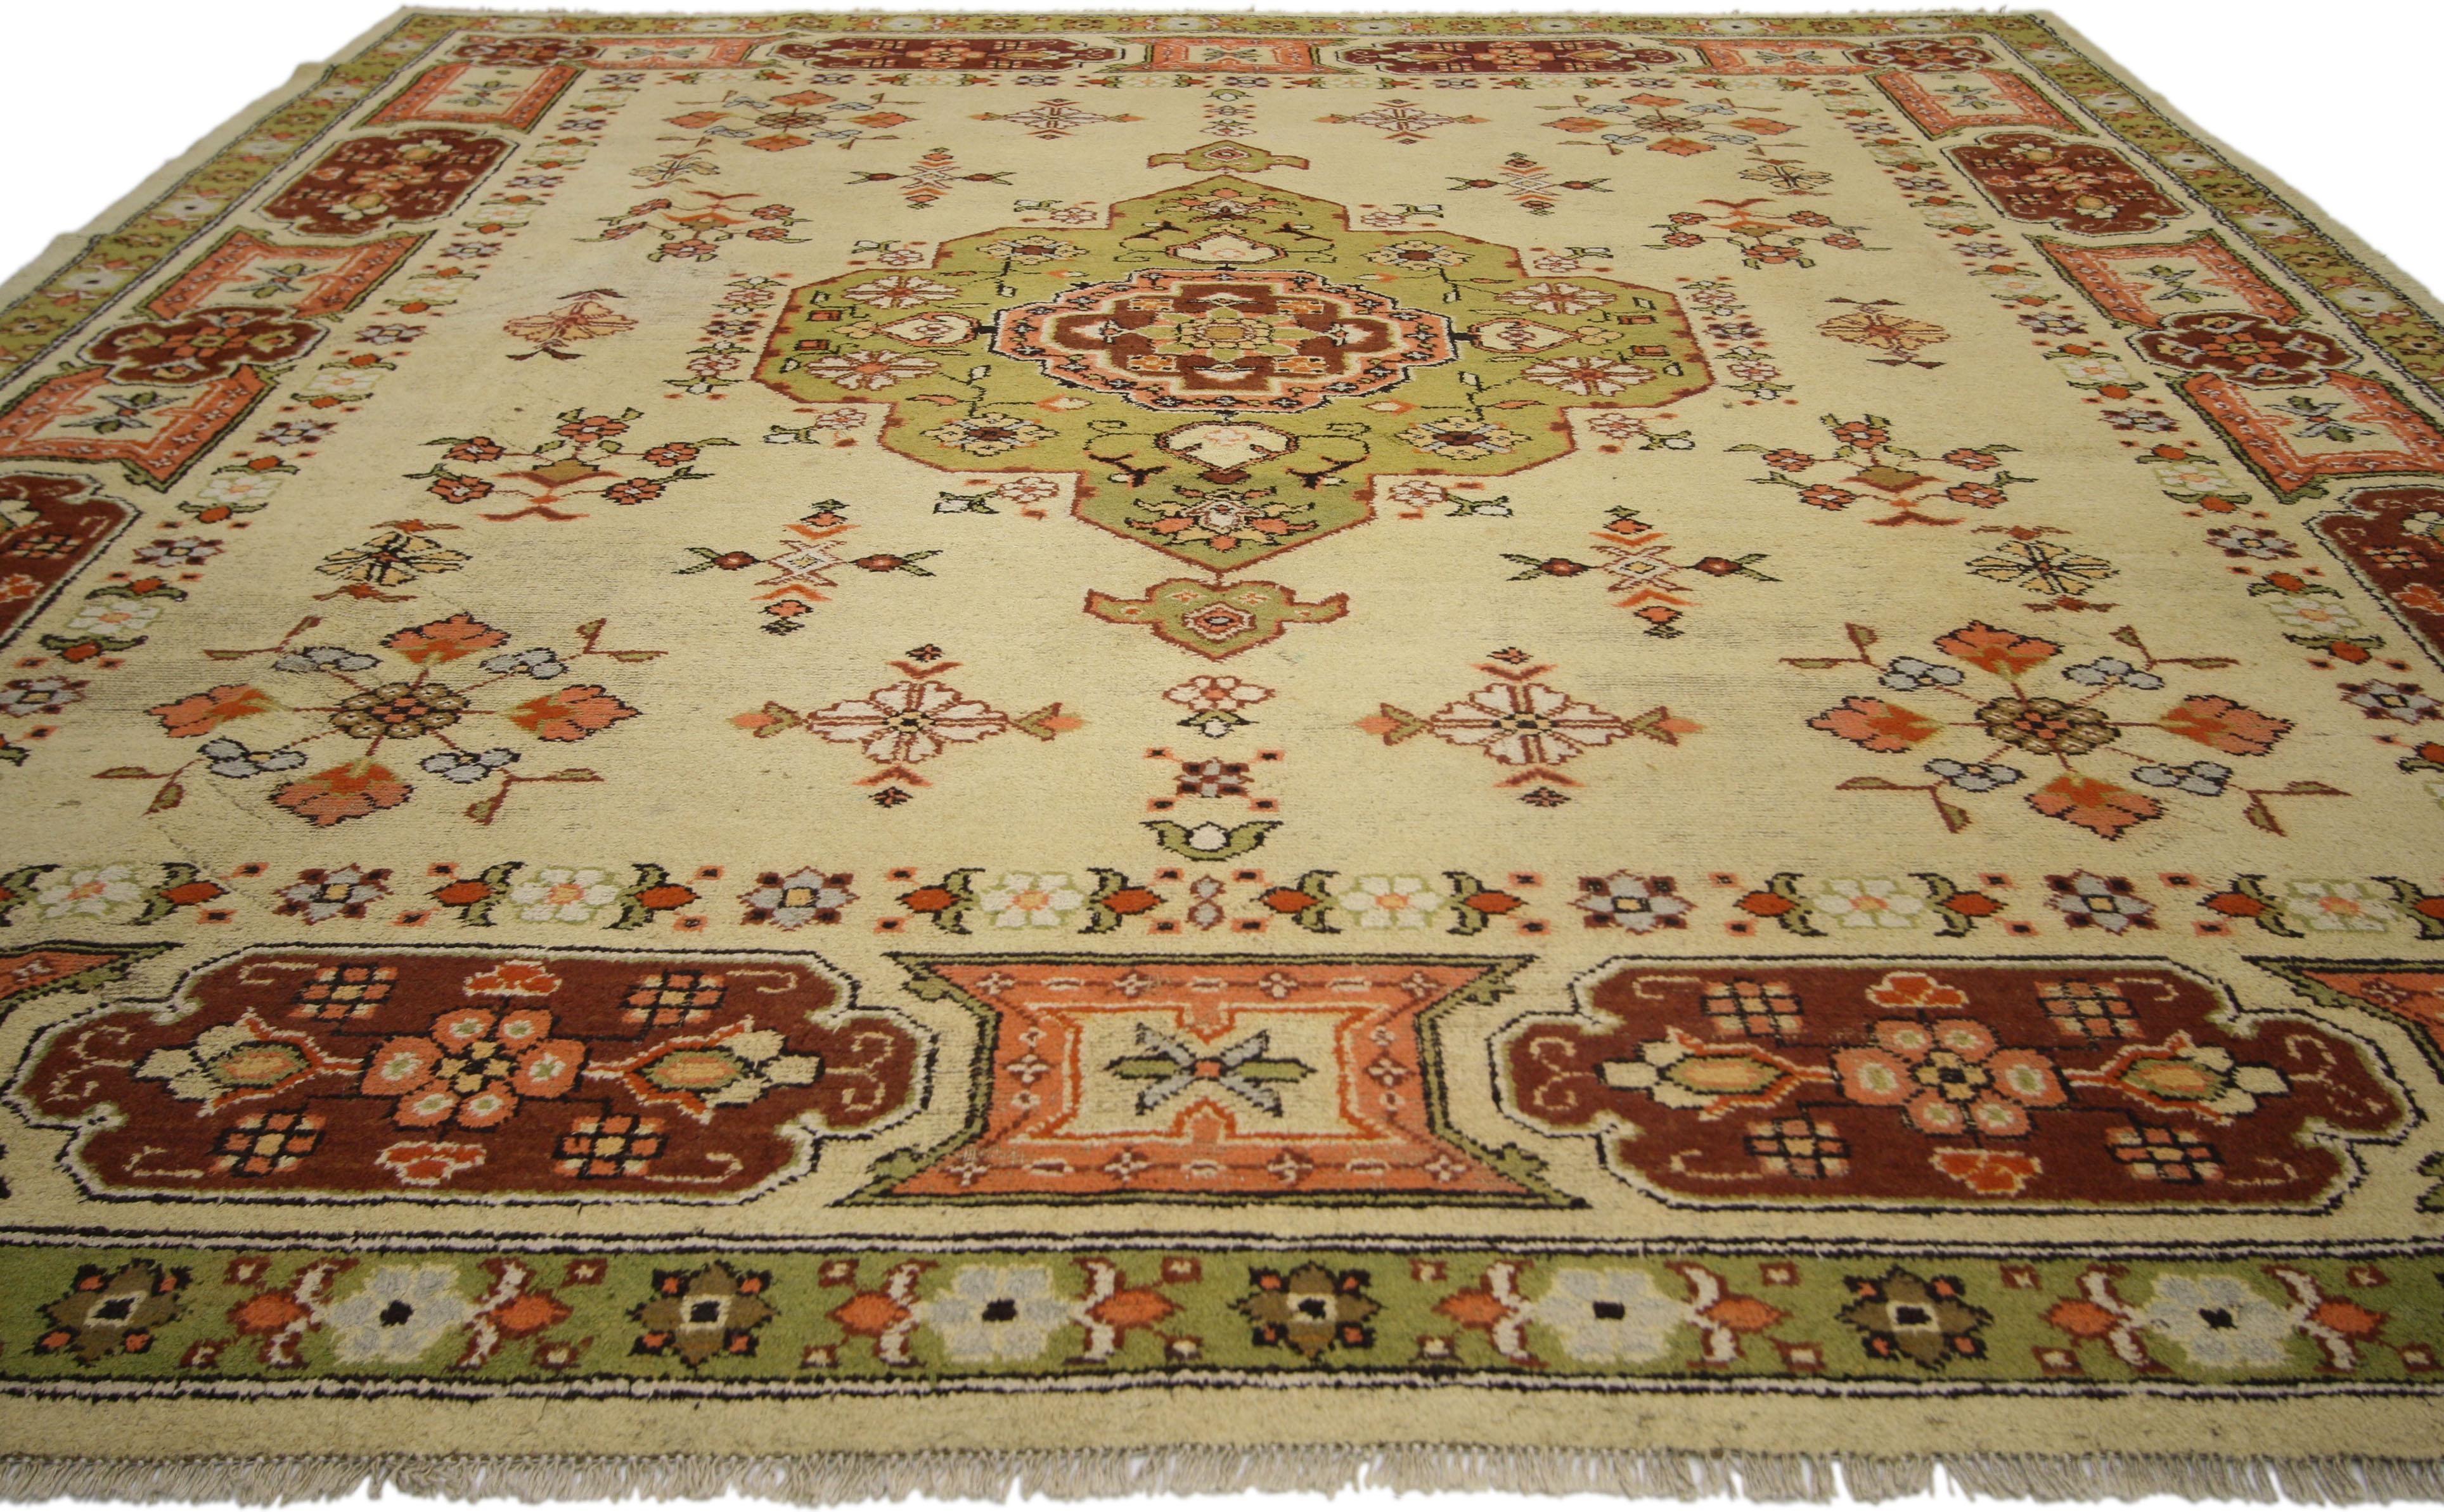 74687, this vintage European area rug with traditional style features an eight-point lobed centre medallion dotted with geometric motifs and stylized florals. It is framed with a cartouche border set with flowers in a unified, symmetrical